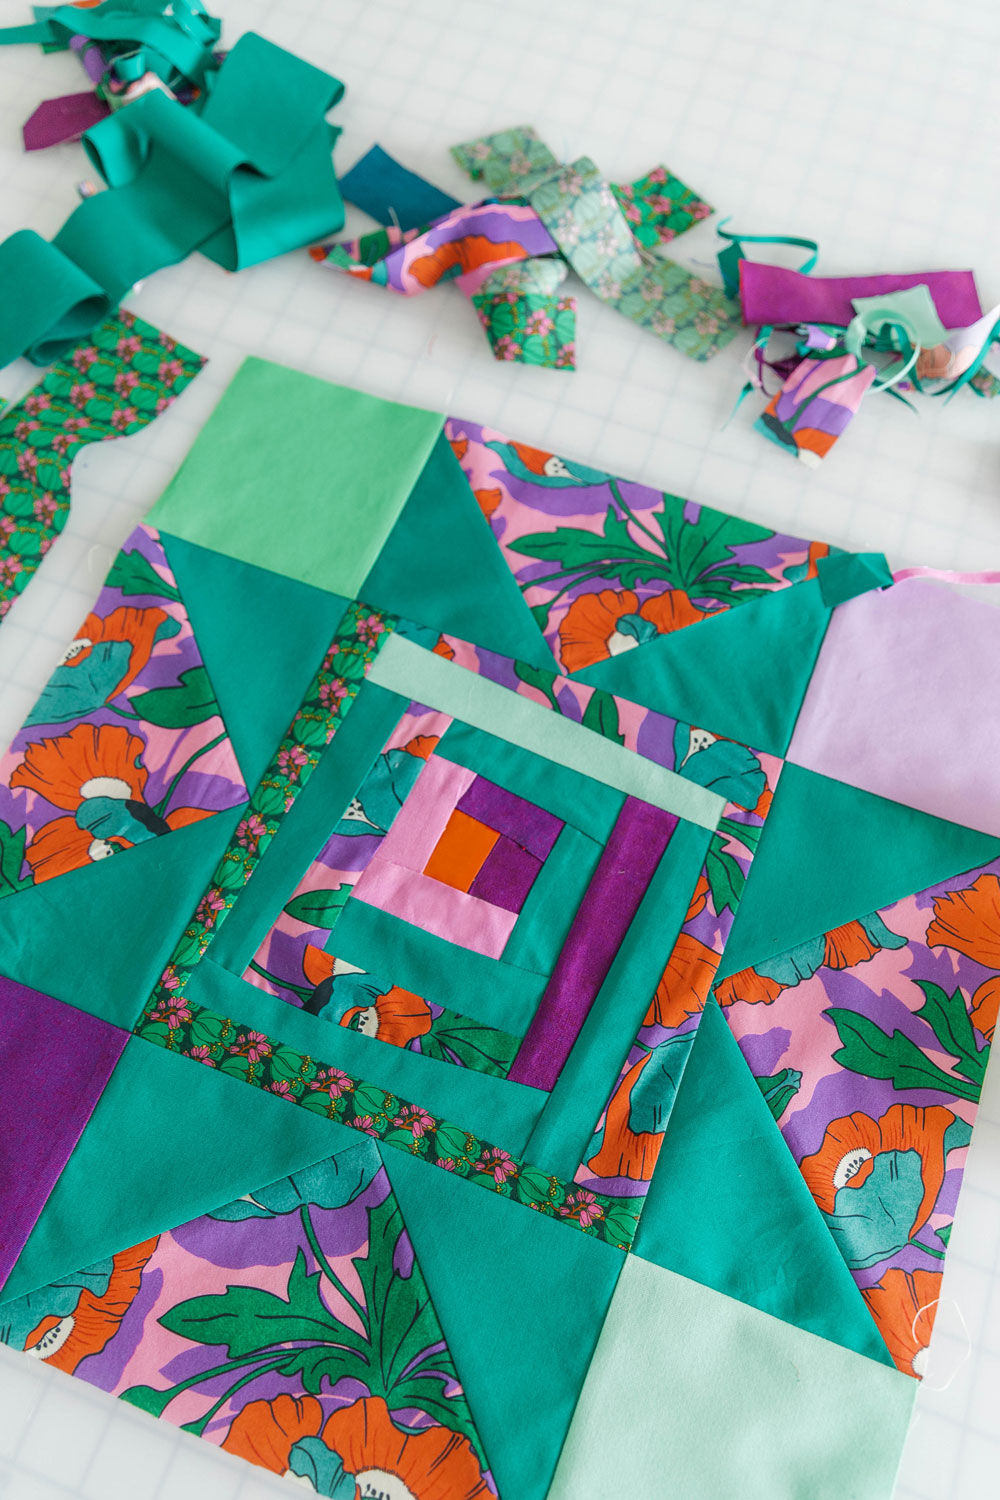 The Shining Star quilt and pillow pattern are perfect for precuts and scraps! Here are some tips on how to use scrap fabric you already have. suzyquilts.com #quilting #fabric